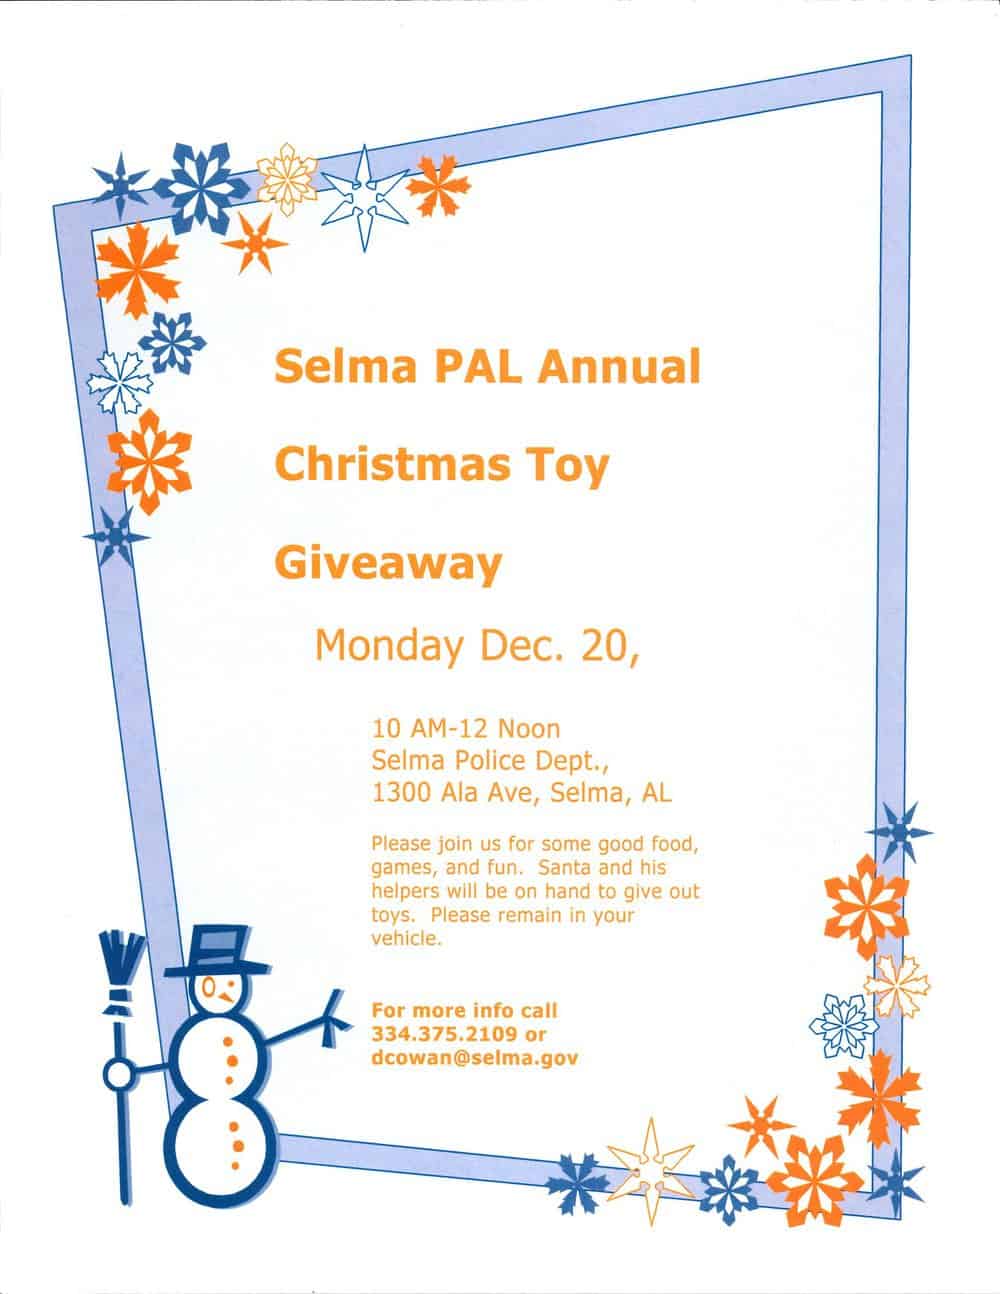 Selma_PAL_Annual_Christmas_Toy_Giveaway.jpg